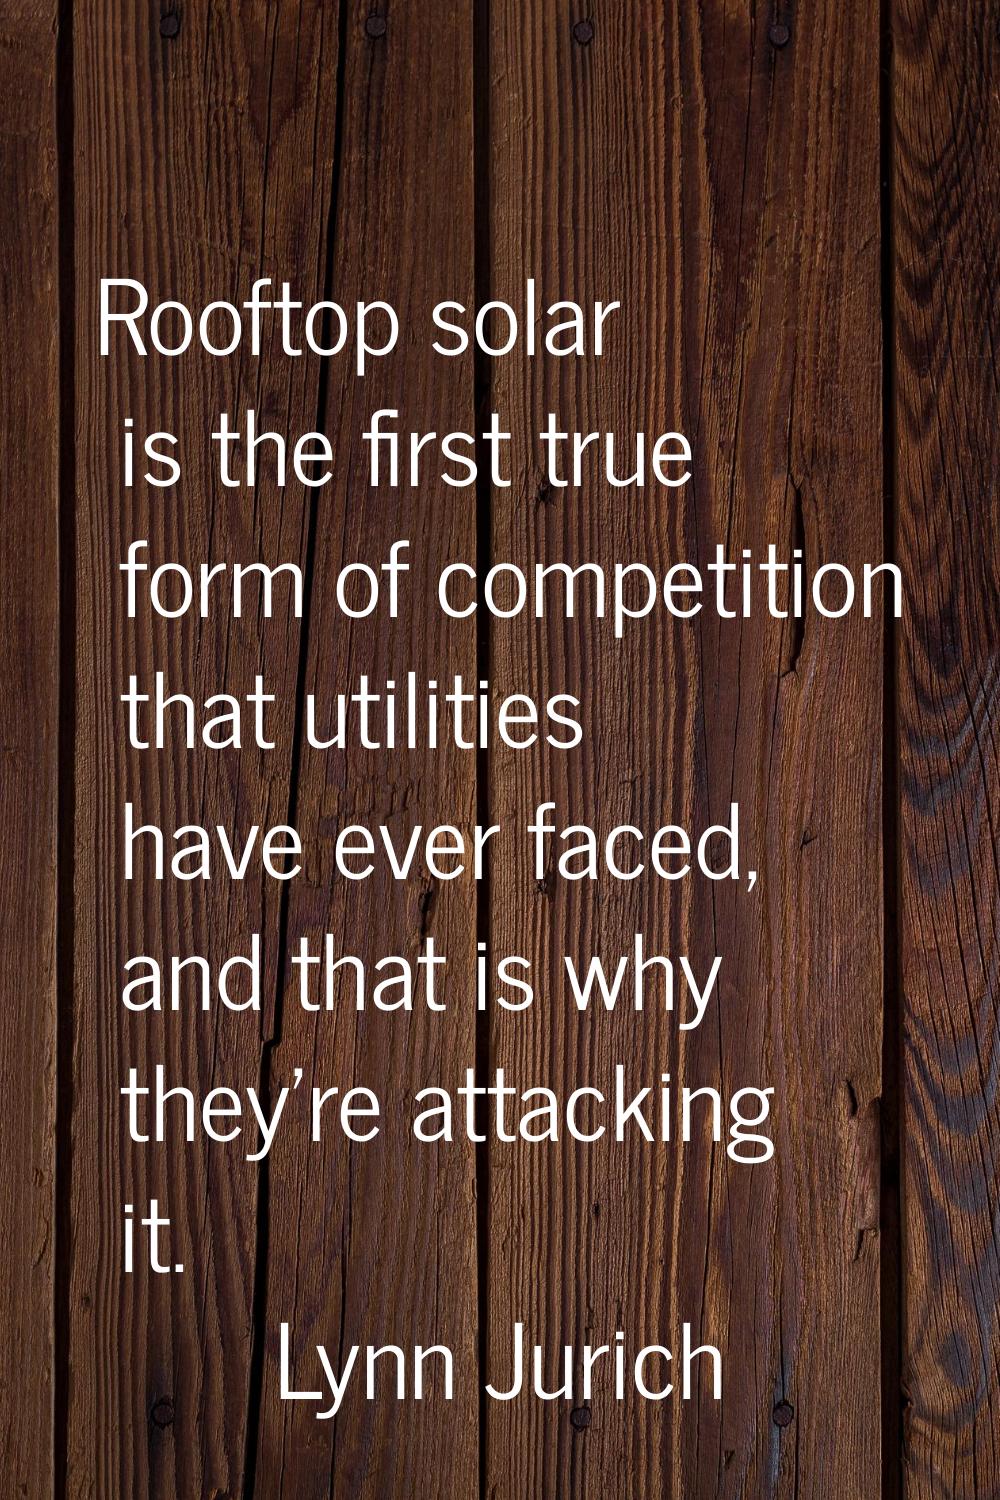 Rooftop solar is the first true form of competition that utilities have ever faced, and that is why